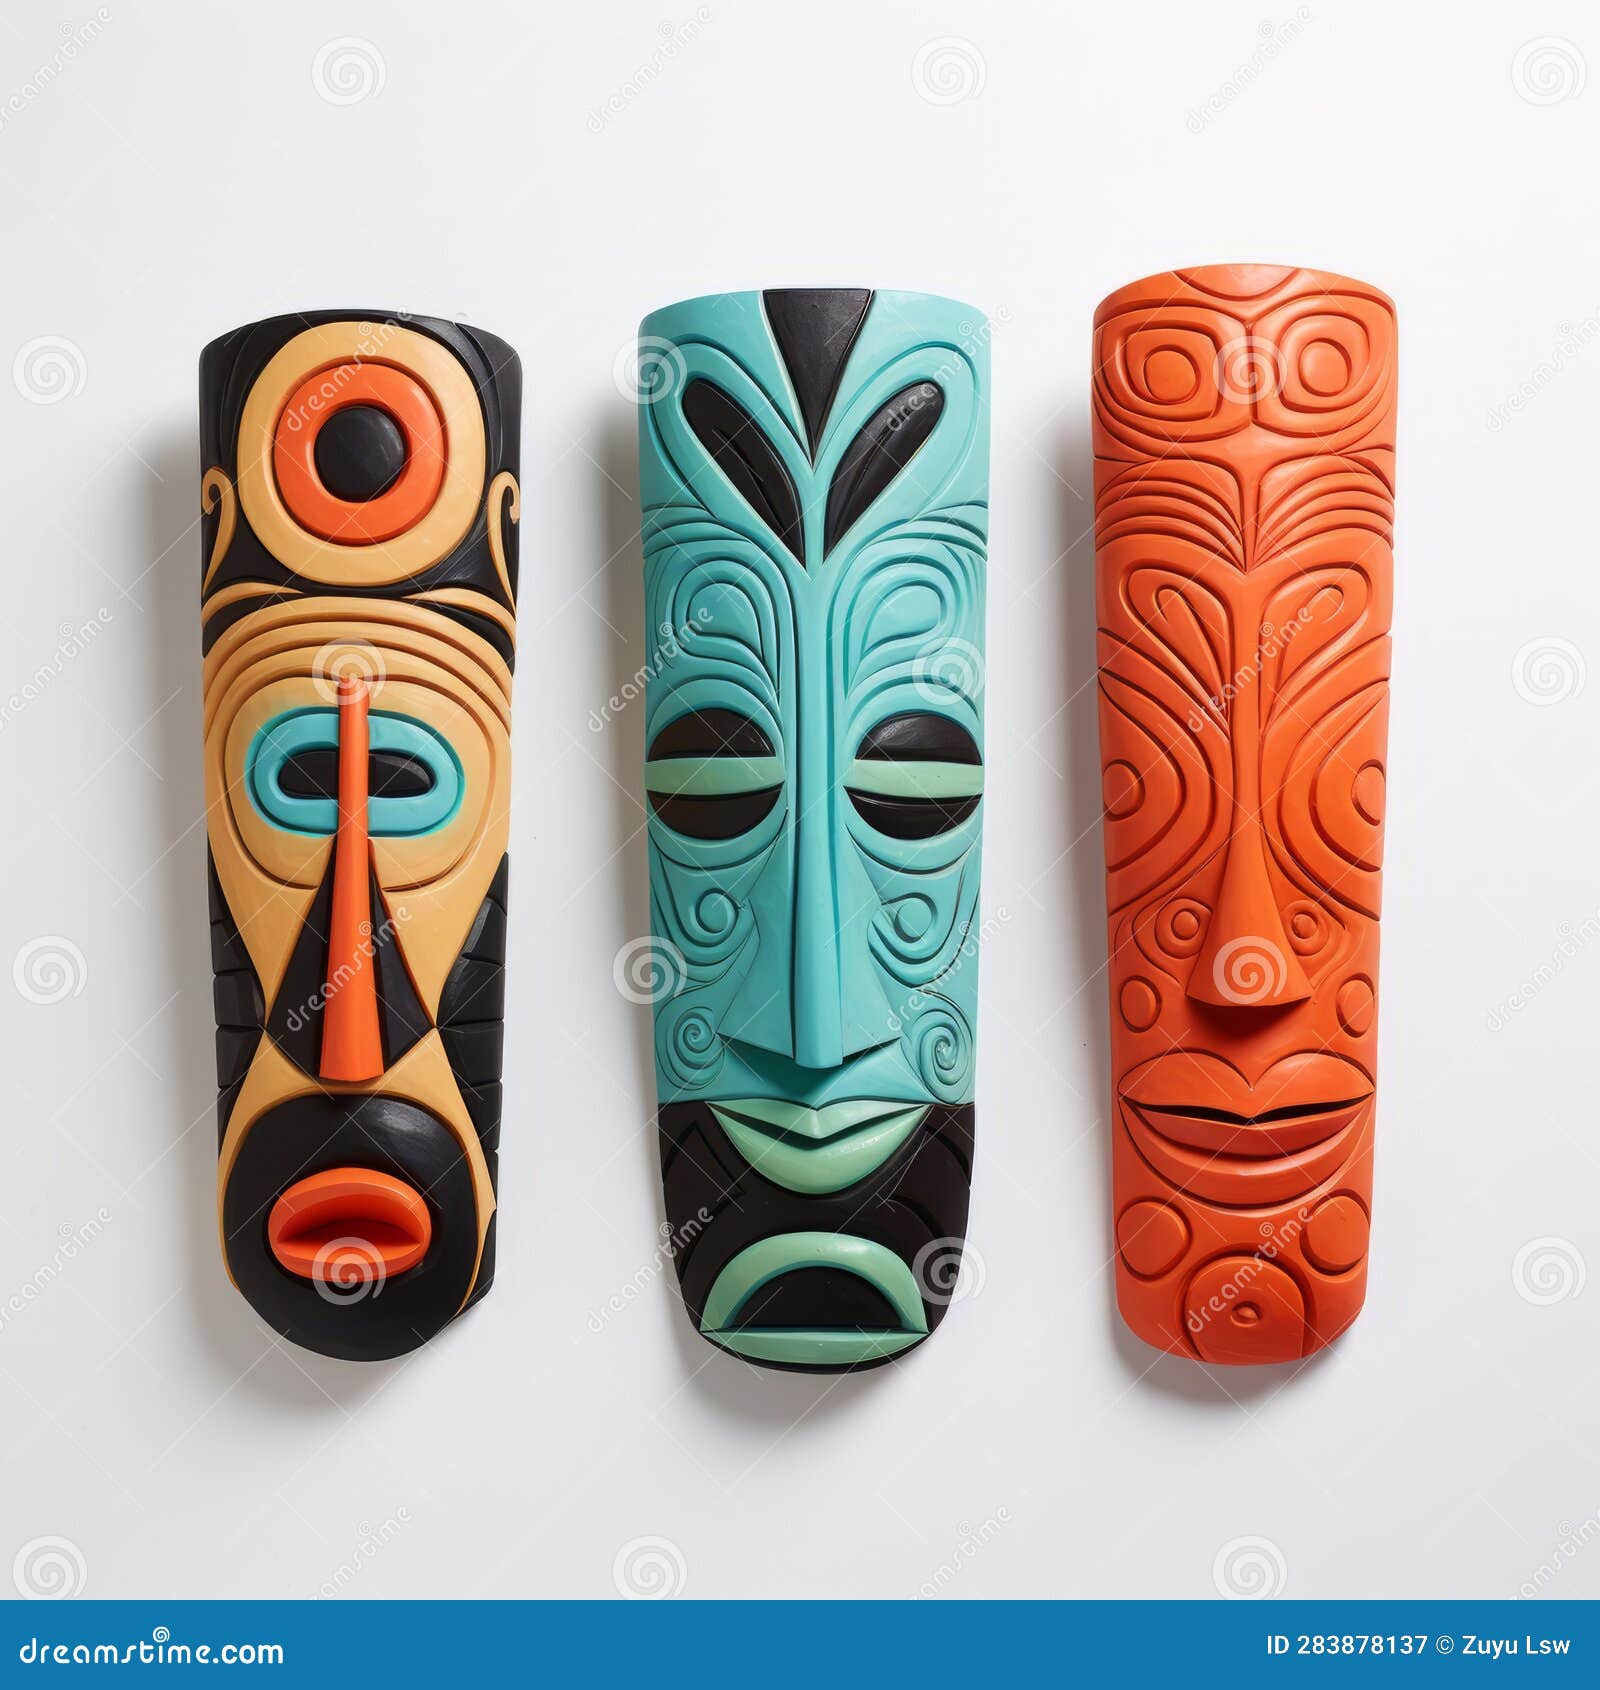 African, Hawaiian or Aztec Ethnic Tribal Ritual Masks Shaped after ...